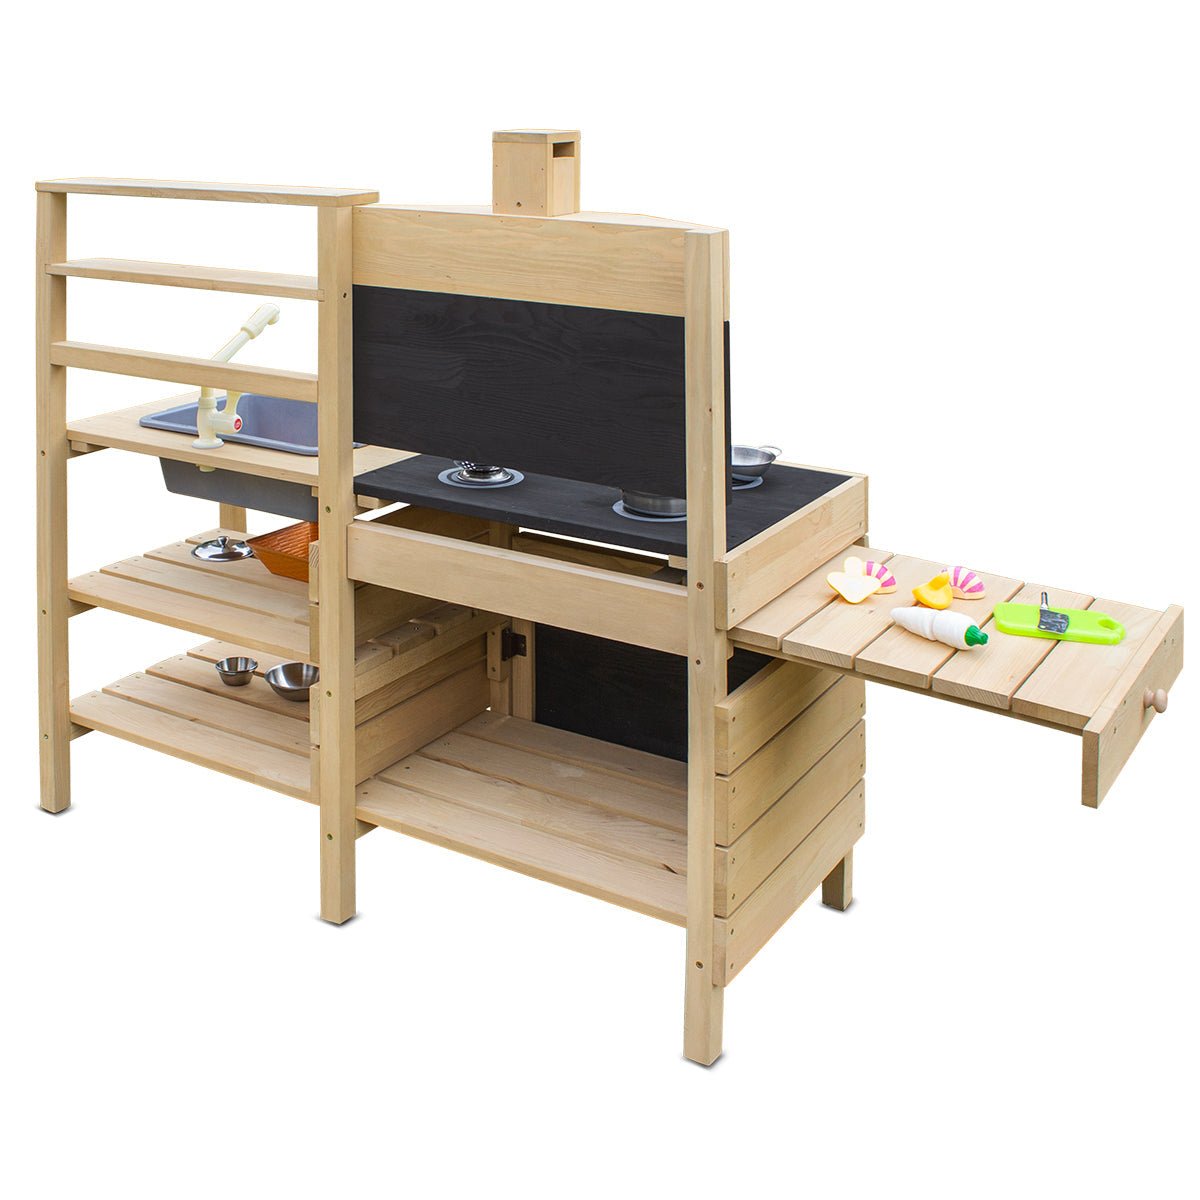 Shop Kids Mega Mart for Ramsey Outdoor Play Kitchen: Cooking with Joy